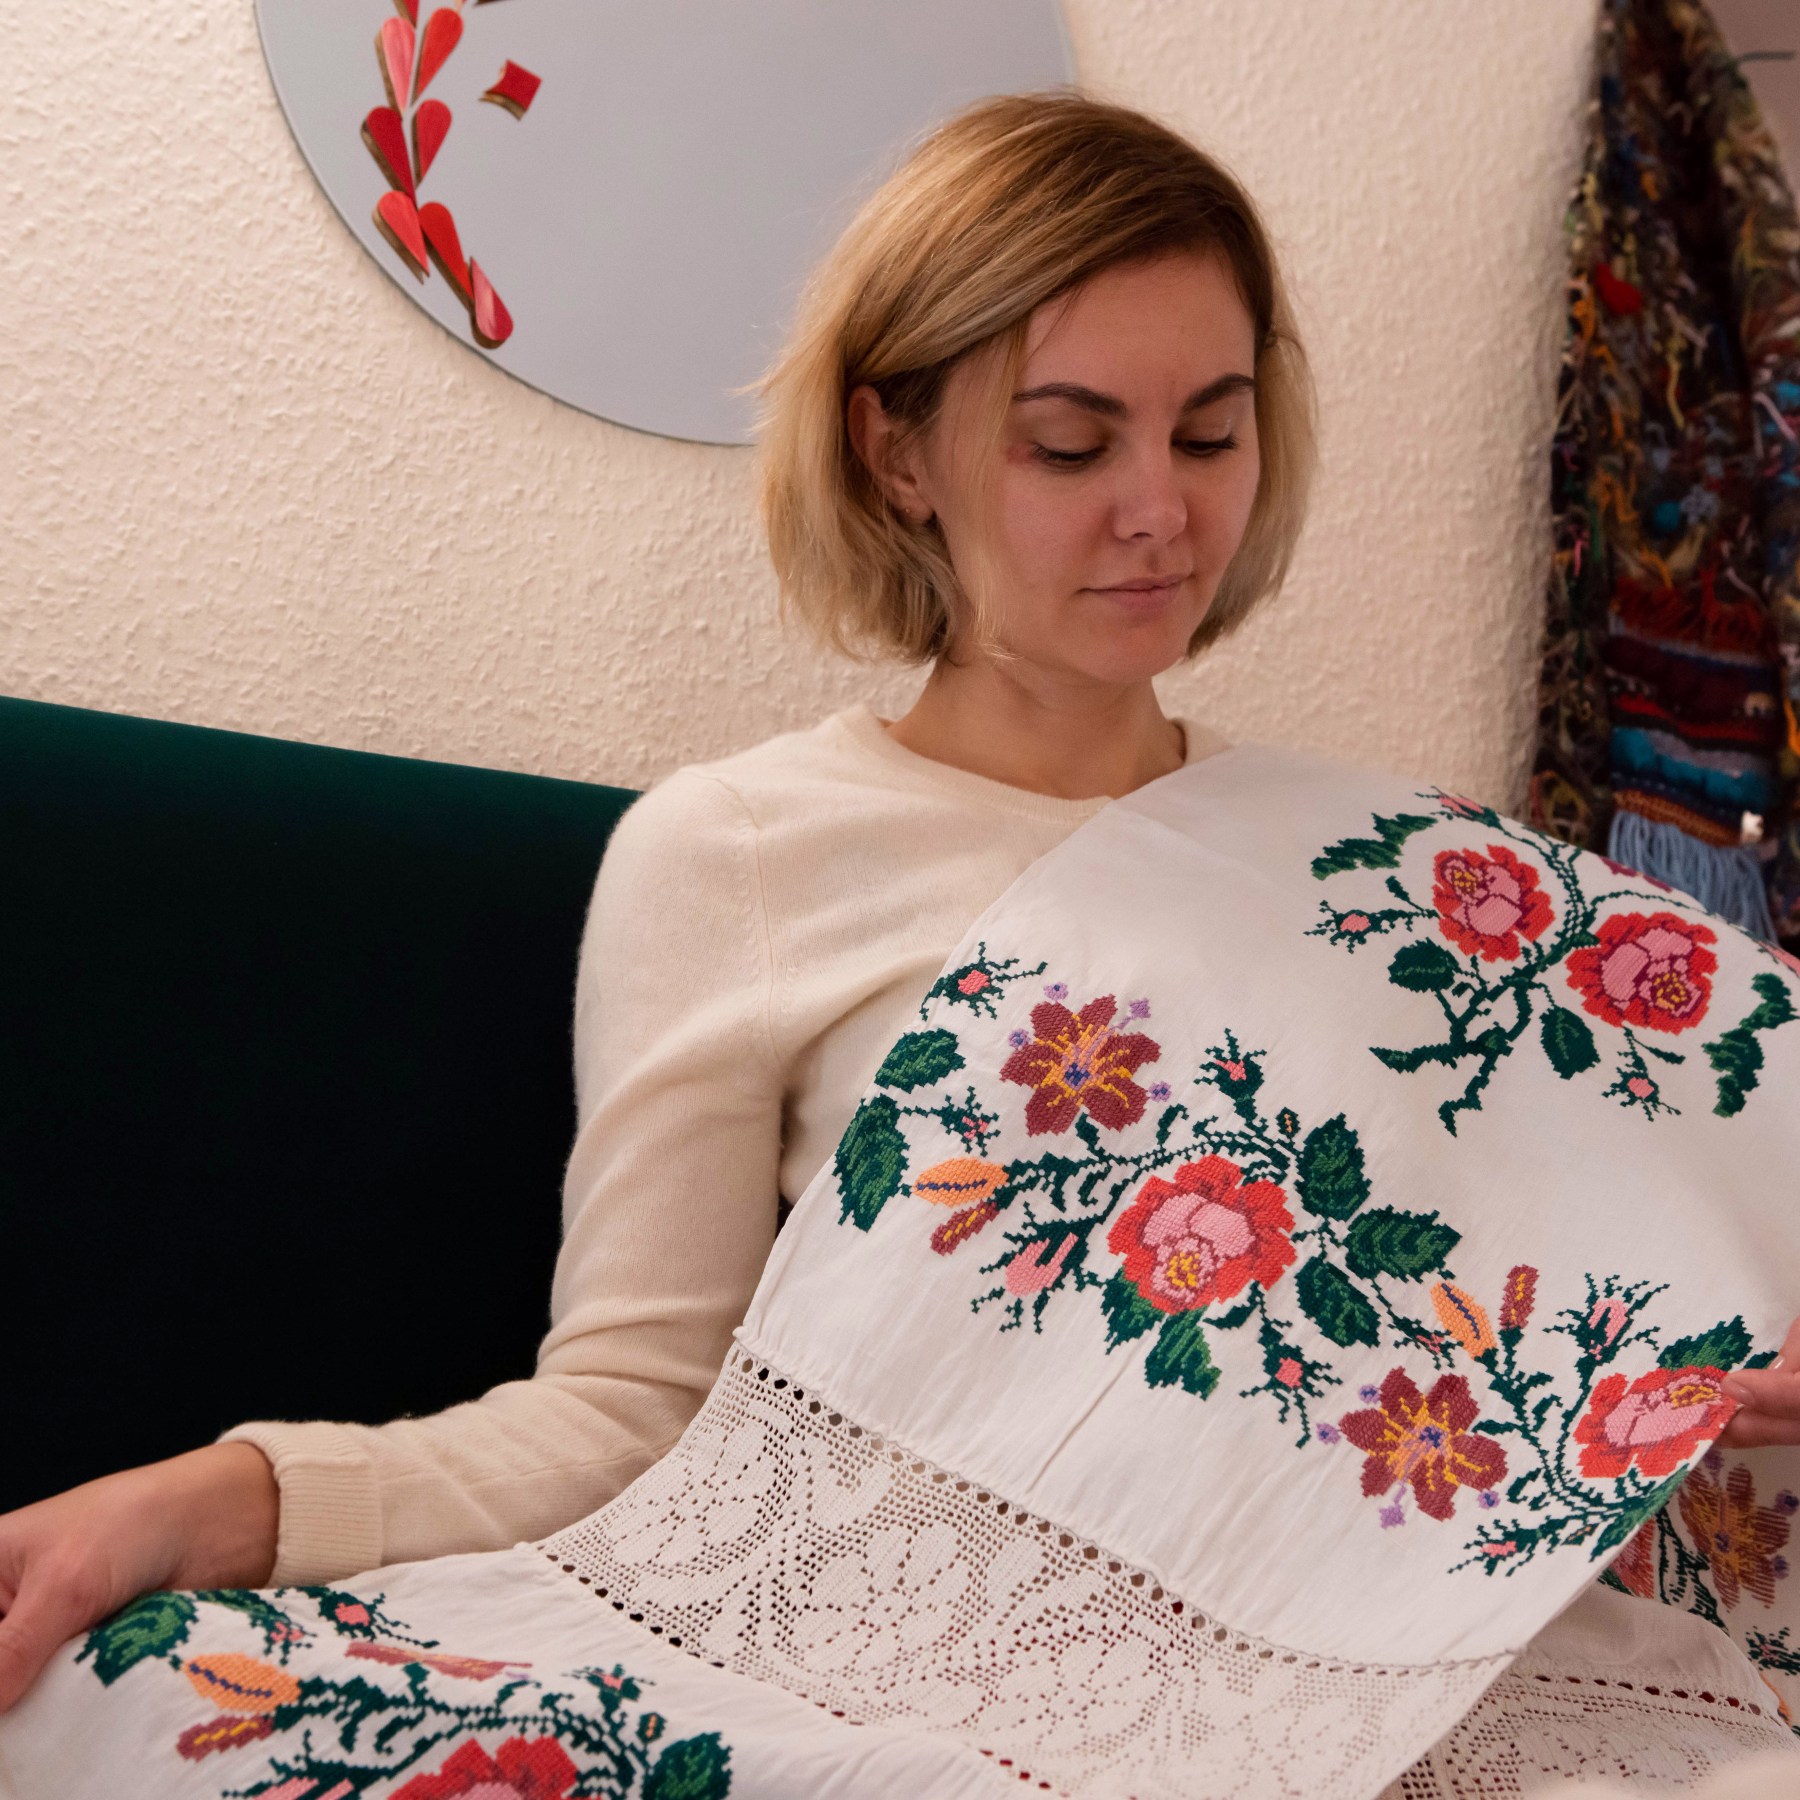 The Ukrainians using embroidery to stand up to Russia